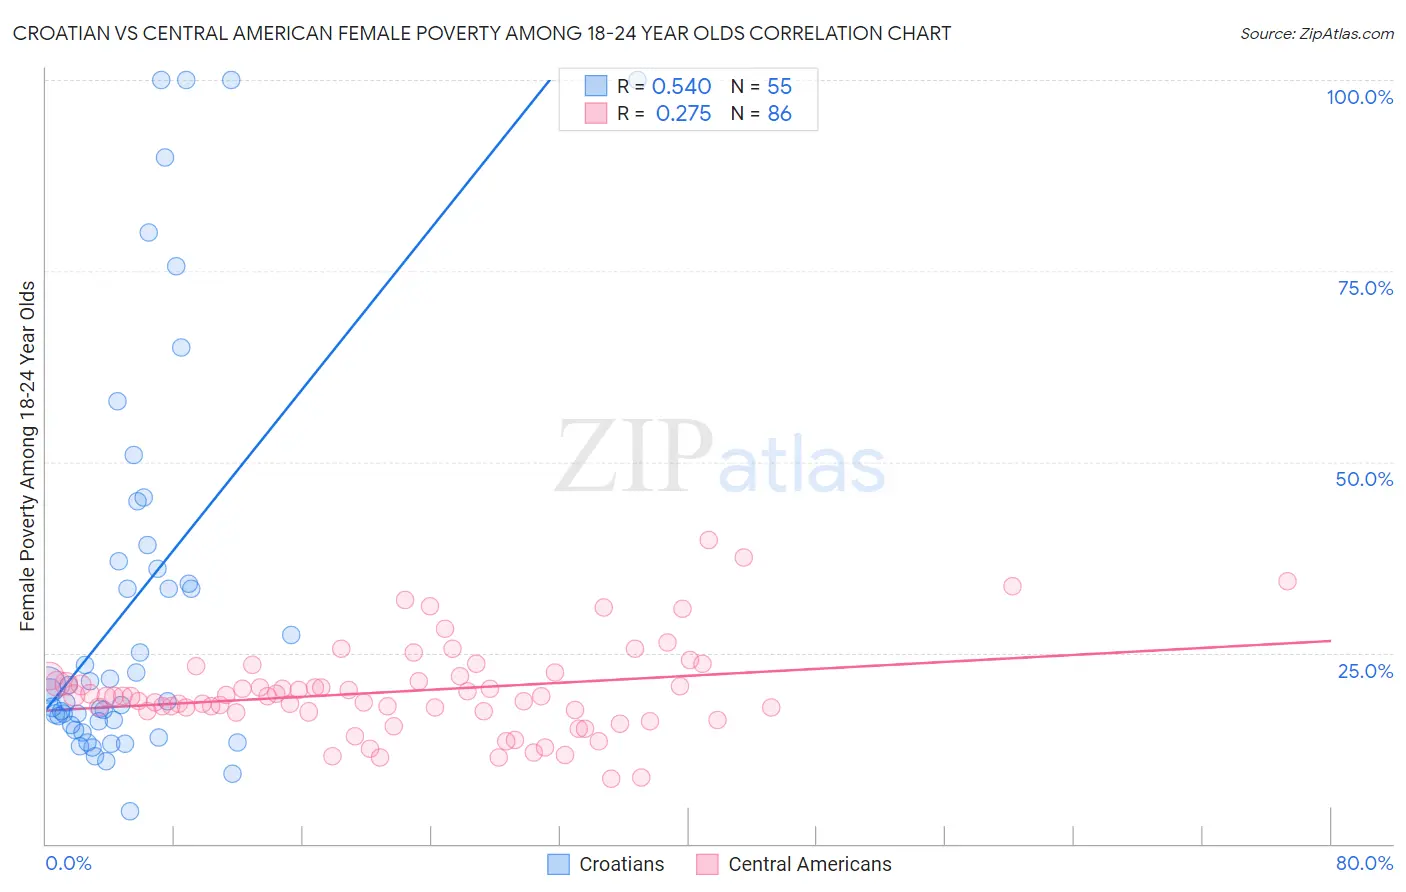 Croatian vs Central American Female Poverty Among 18-24 Year Olds